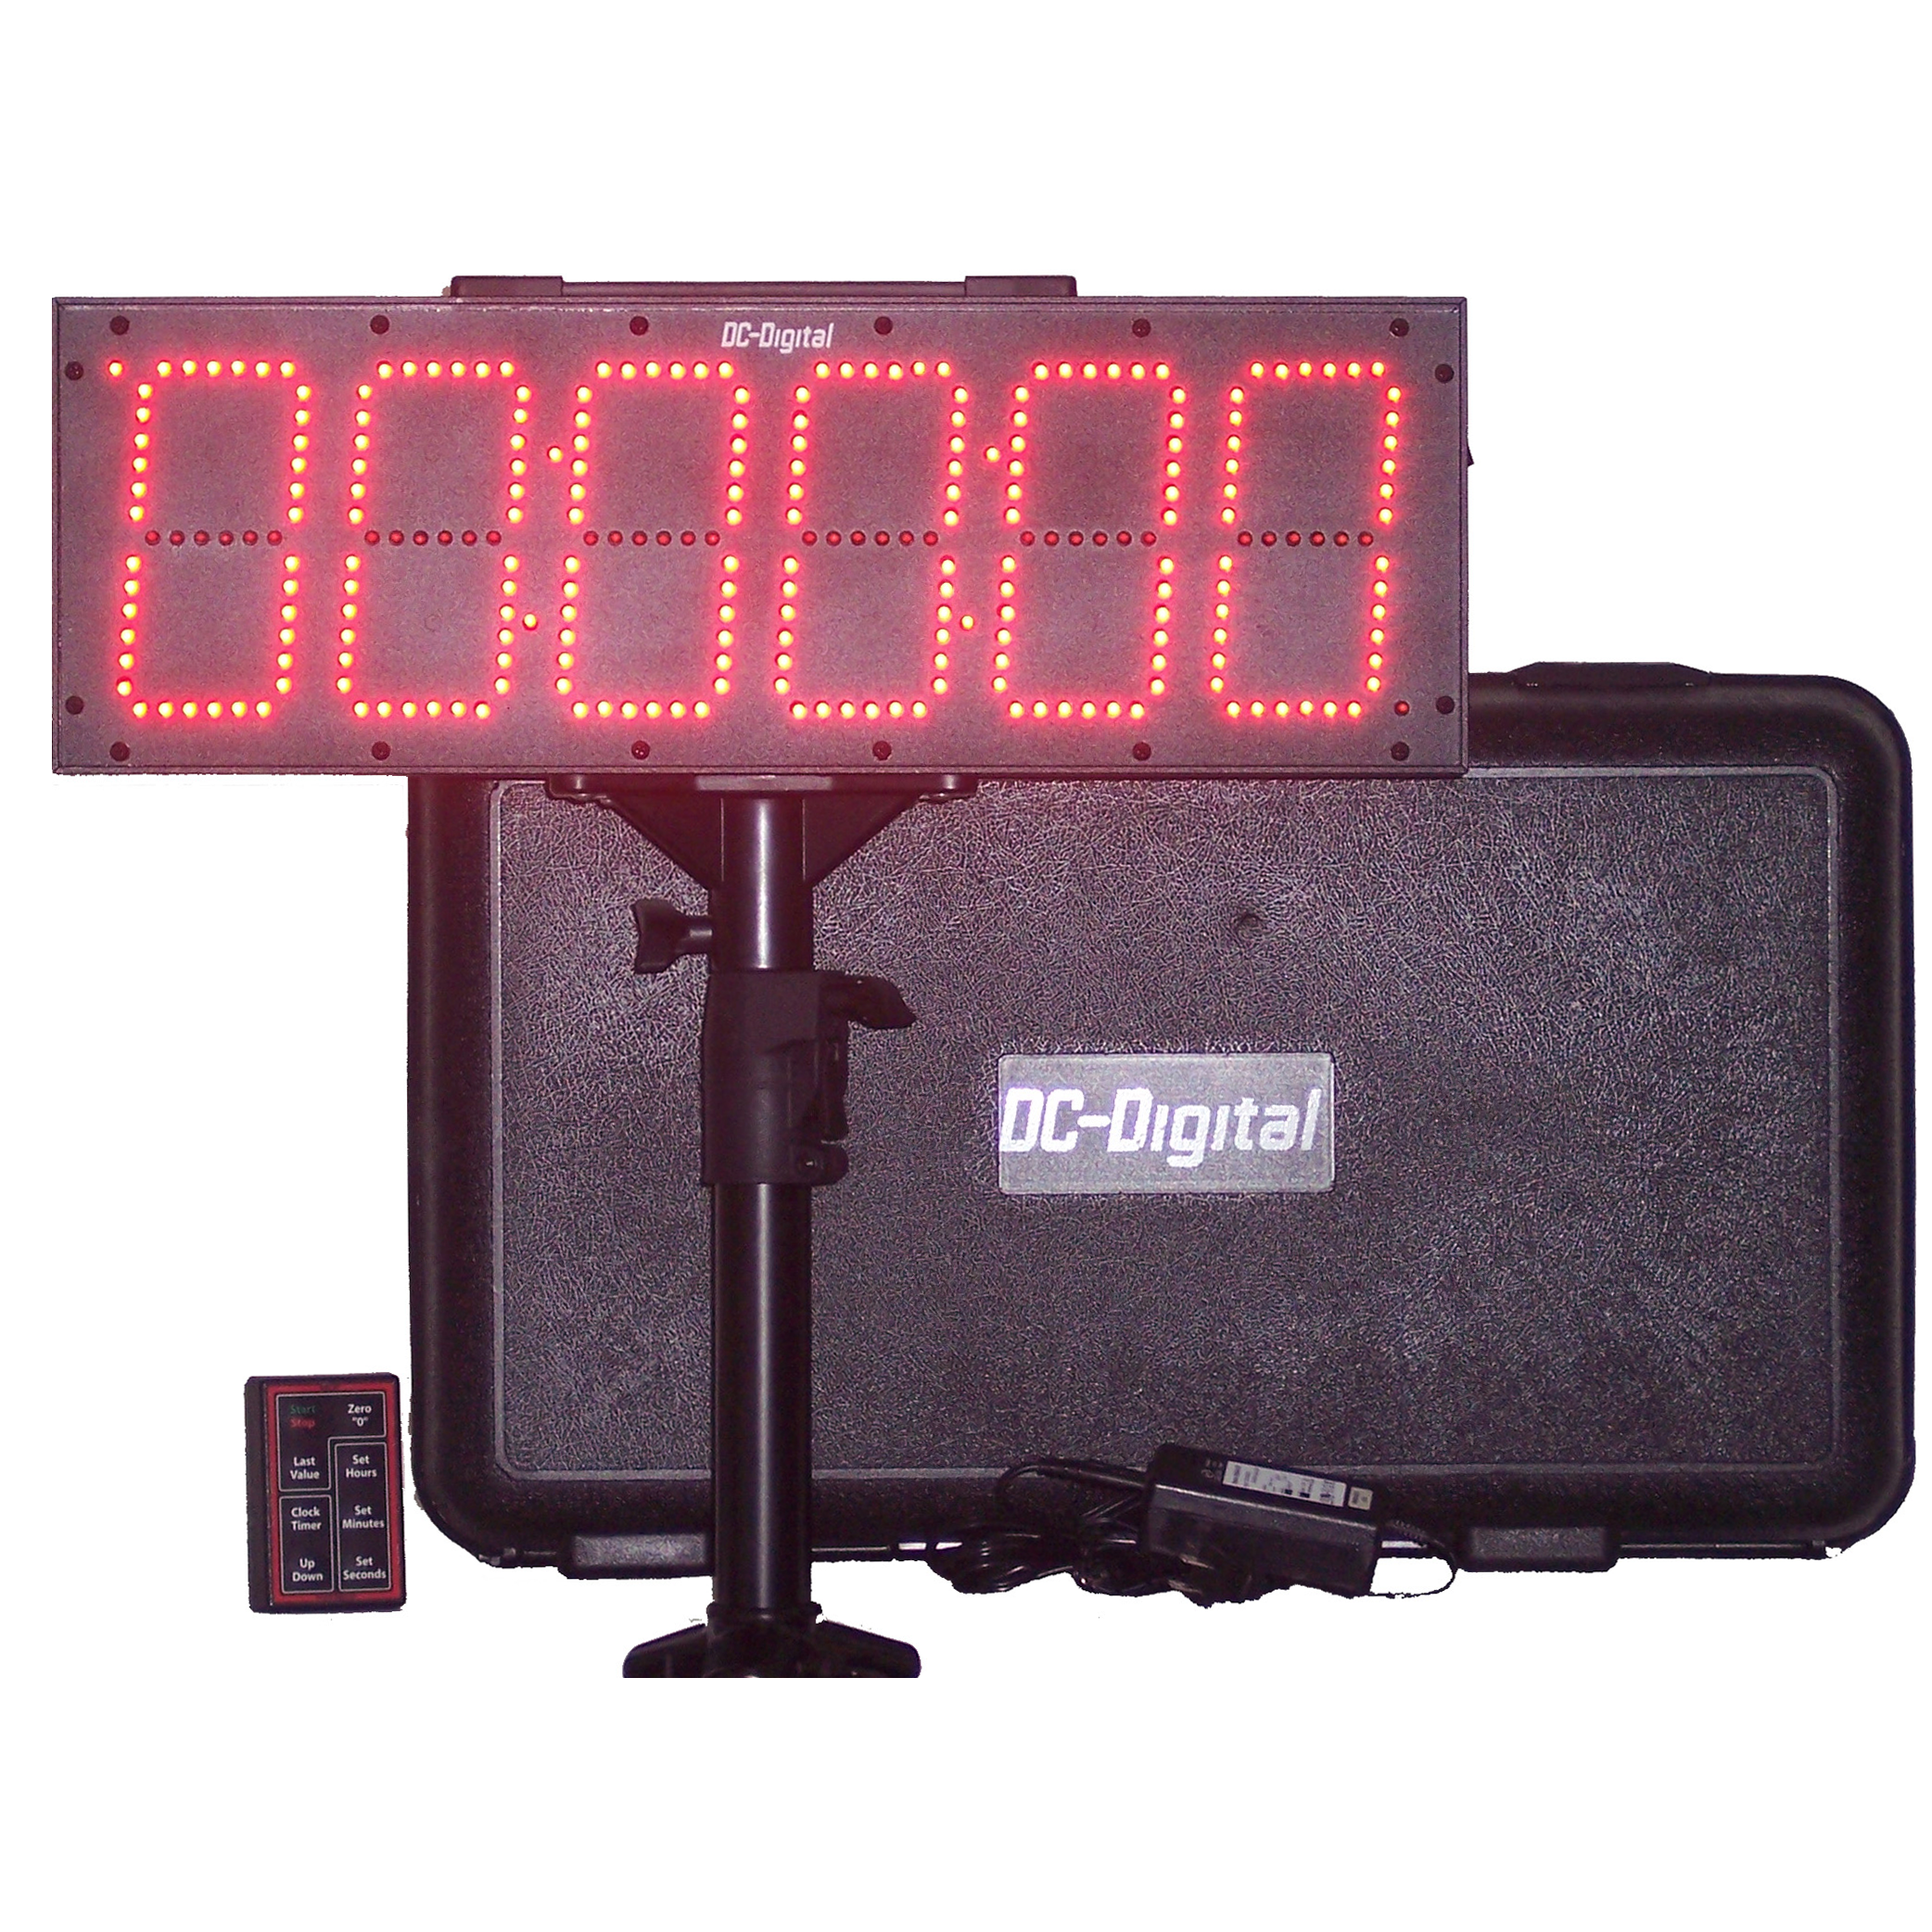 Portable 6 inch led, 6 digit, hours, minutes and seconds, Sports timer counts up counts down and time of day , wireless-ly controlled battery operated